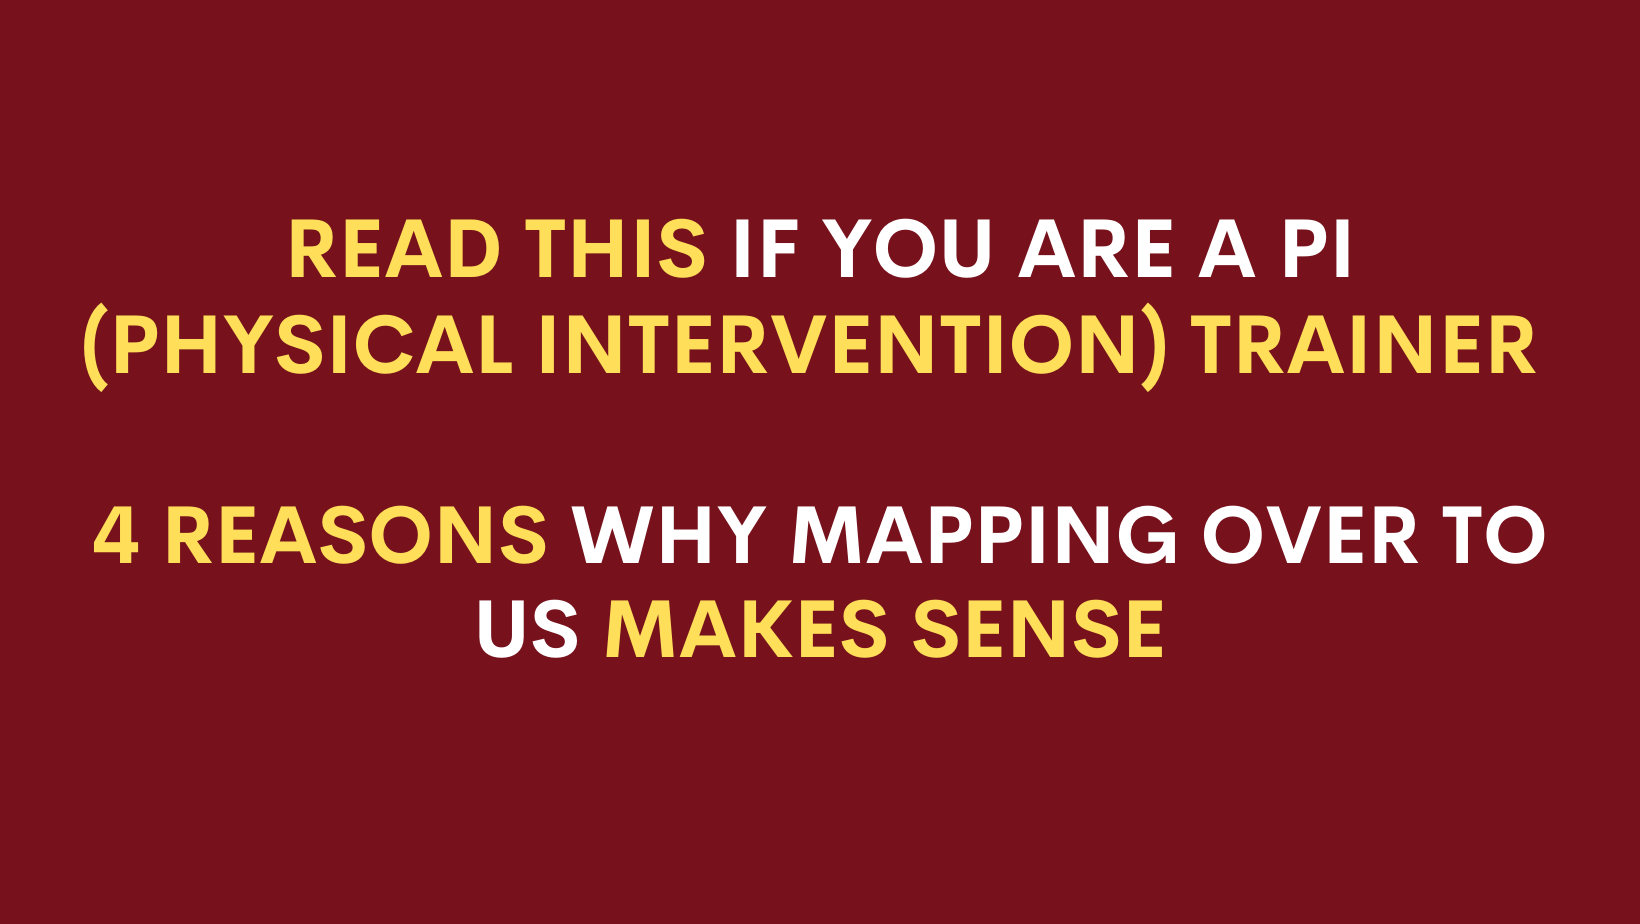 Read This If You Are a PI Trainer. Why Mapping Over To Us Makes Sense